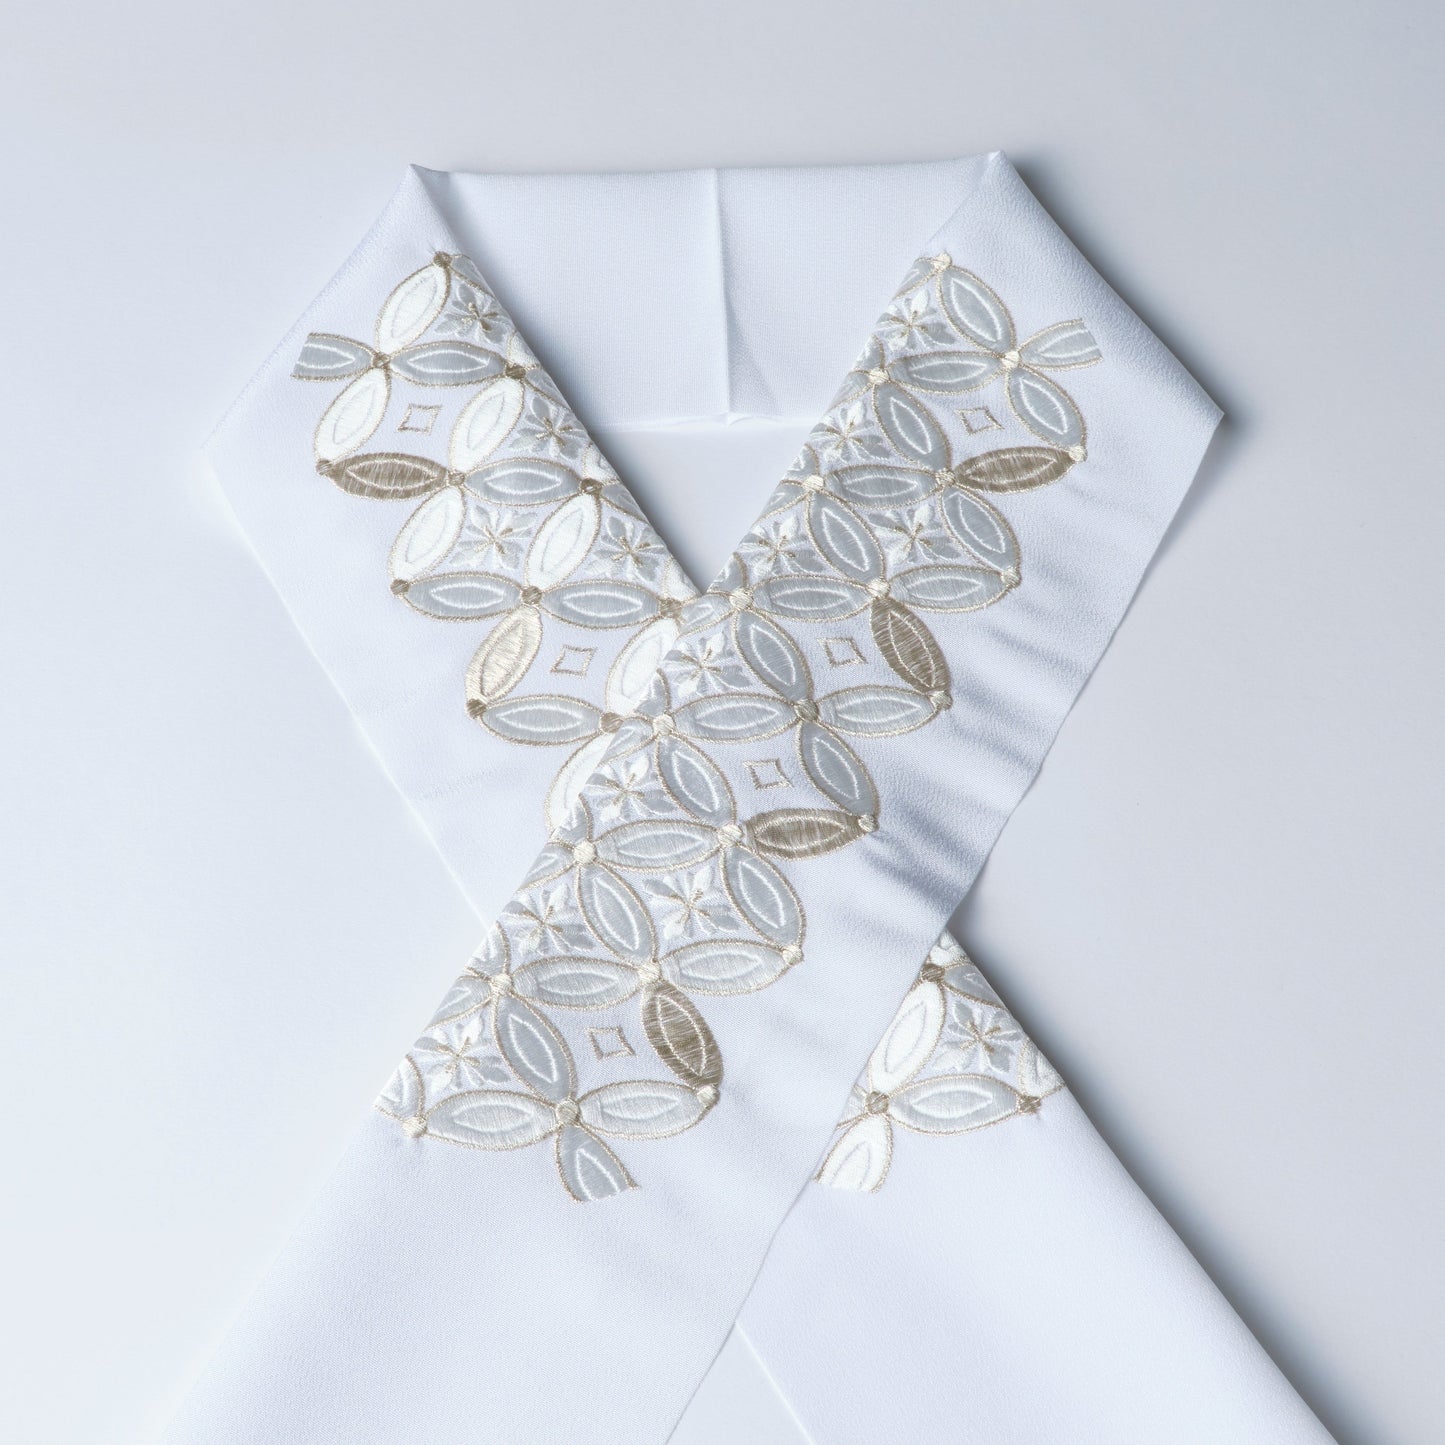 Half-collar embroidery "Cloisonne" white/silver